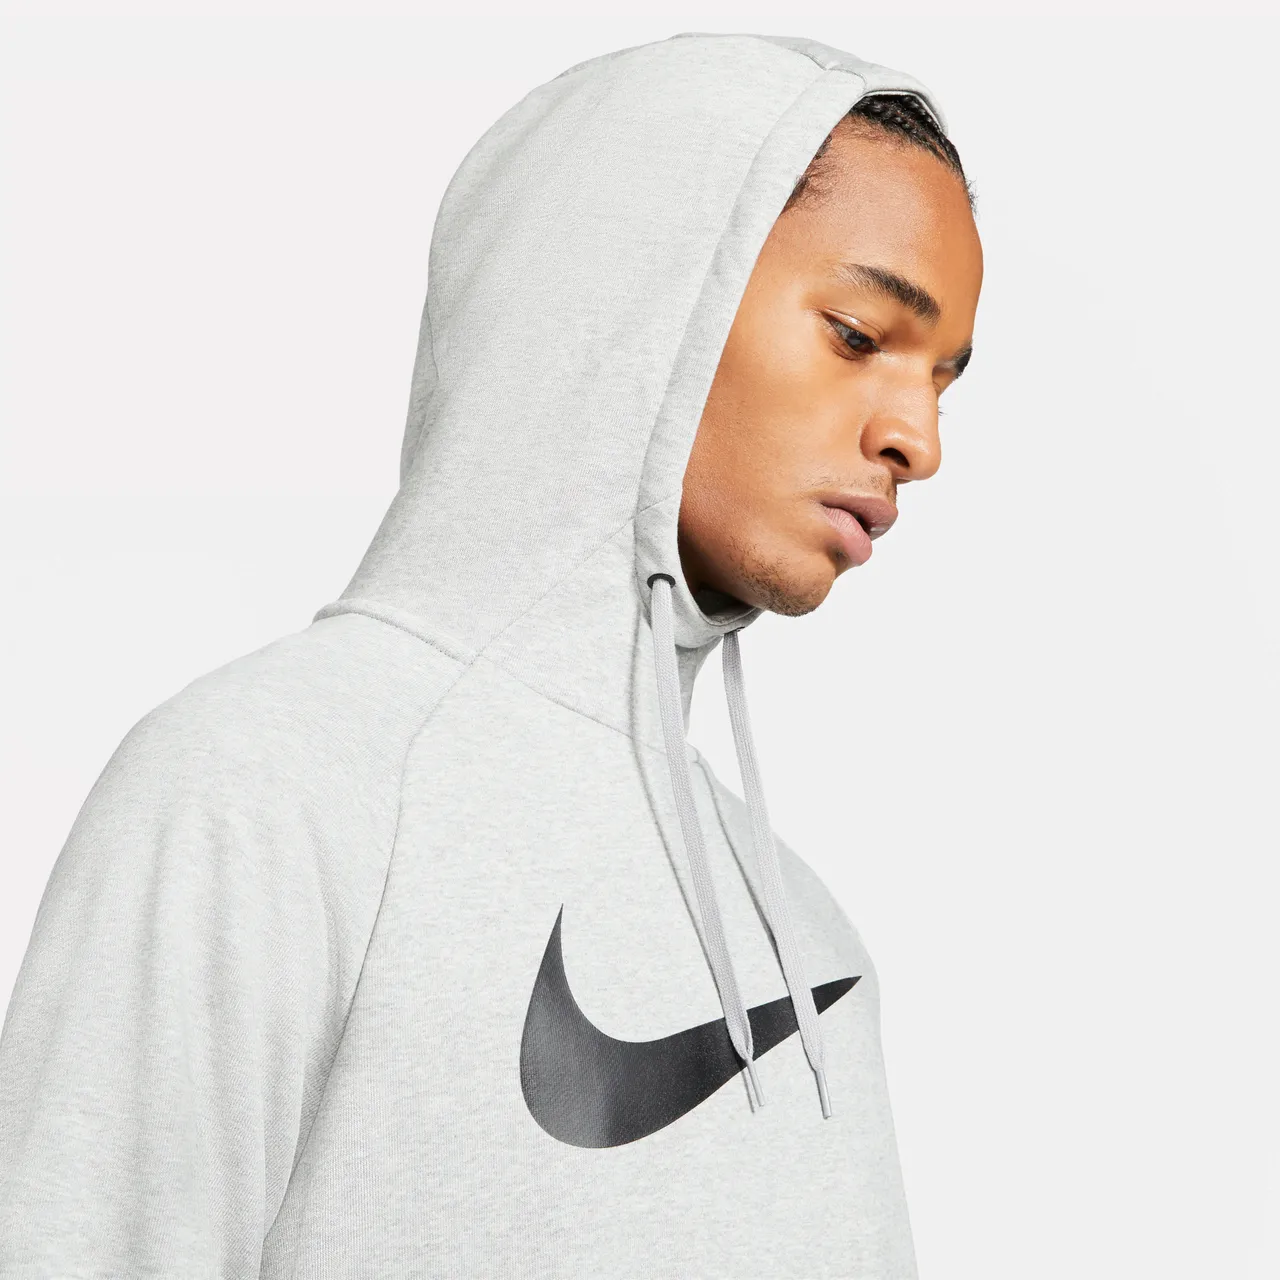 Nike Dry Graphic Men's Dri-FIT Hooded Fitness Pullover Hoodie - Grey - Polyester